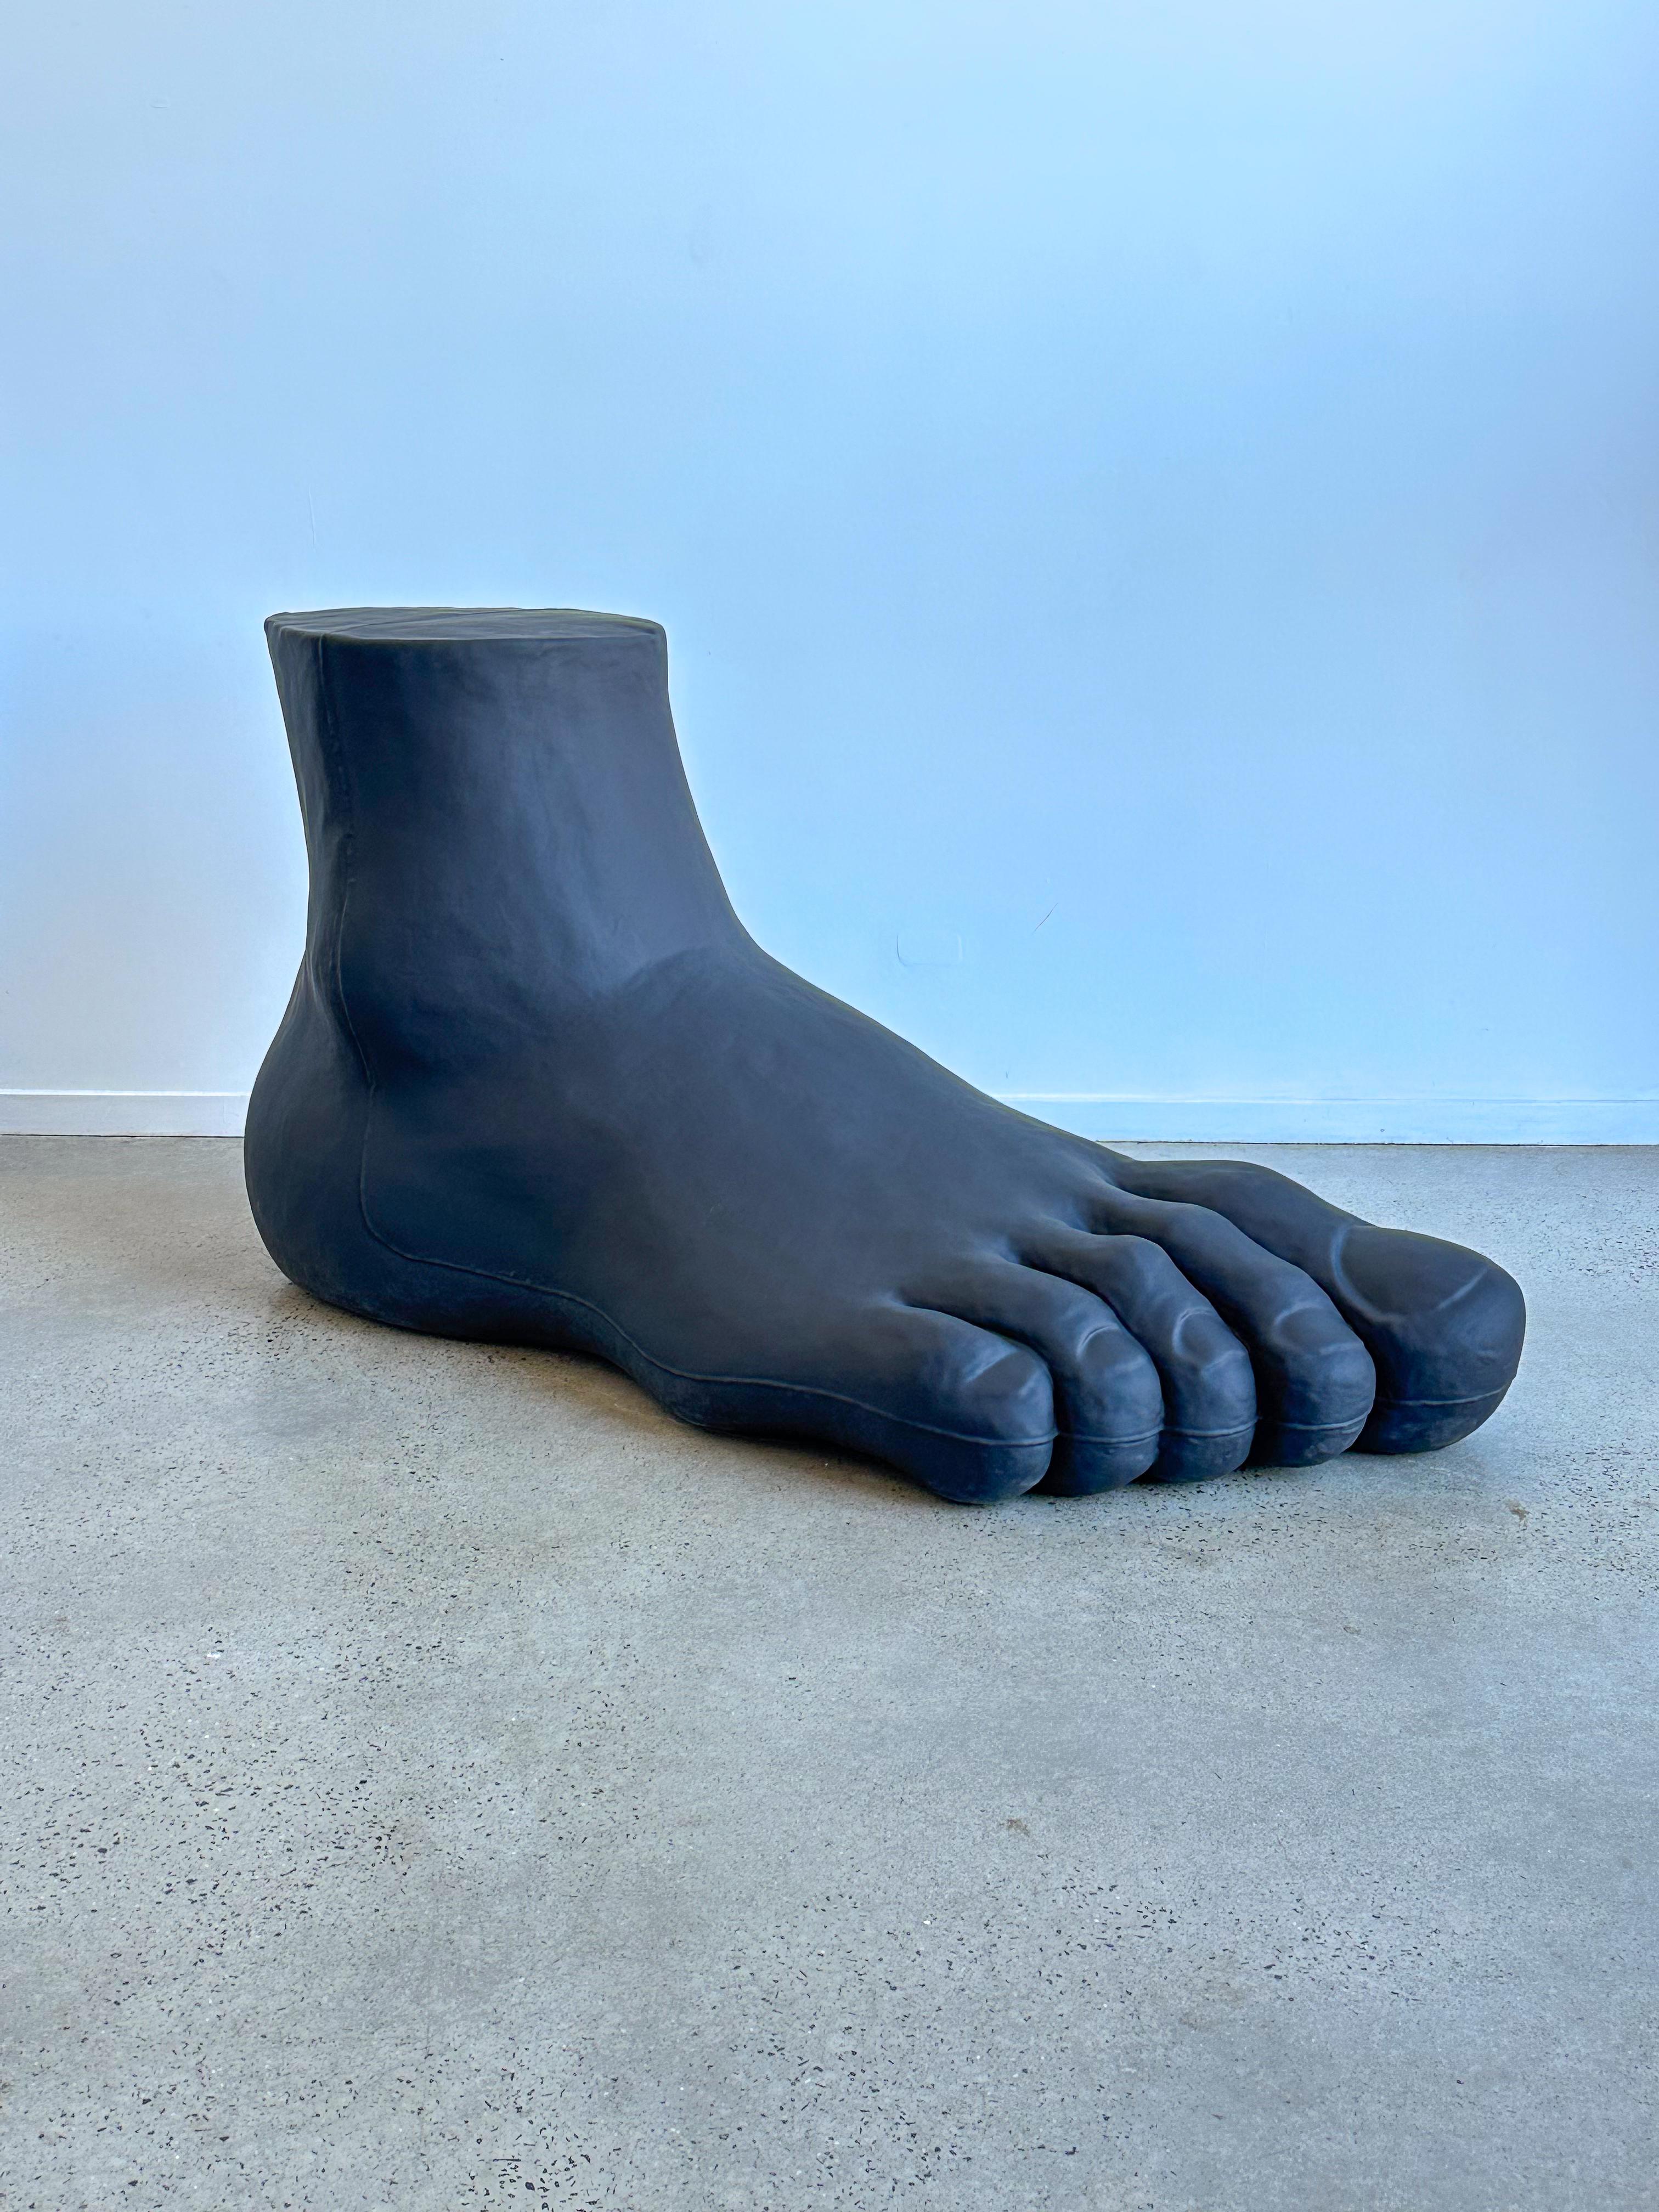 Part of the smooth, somewhat futuristic collection of sculptural furniture pieces known as the UP Series by Gaetano Pesce is a giant polyurethane rubber foot dubbed the UP7. Strangely at odds with the other pieces in the UP Series, the 1.62 metre